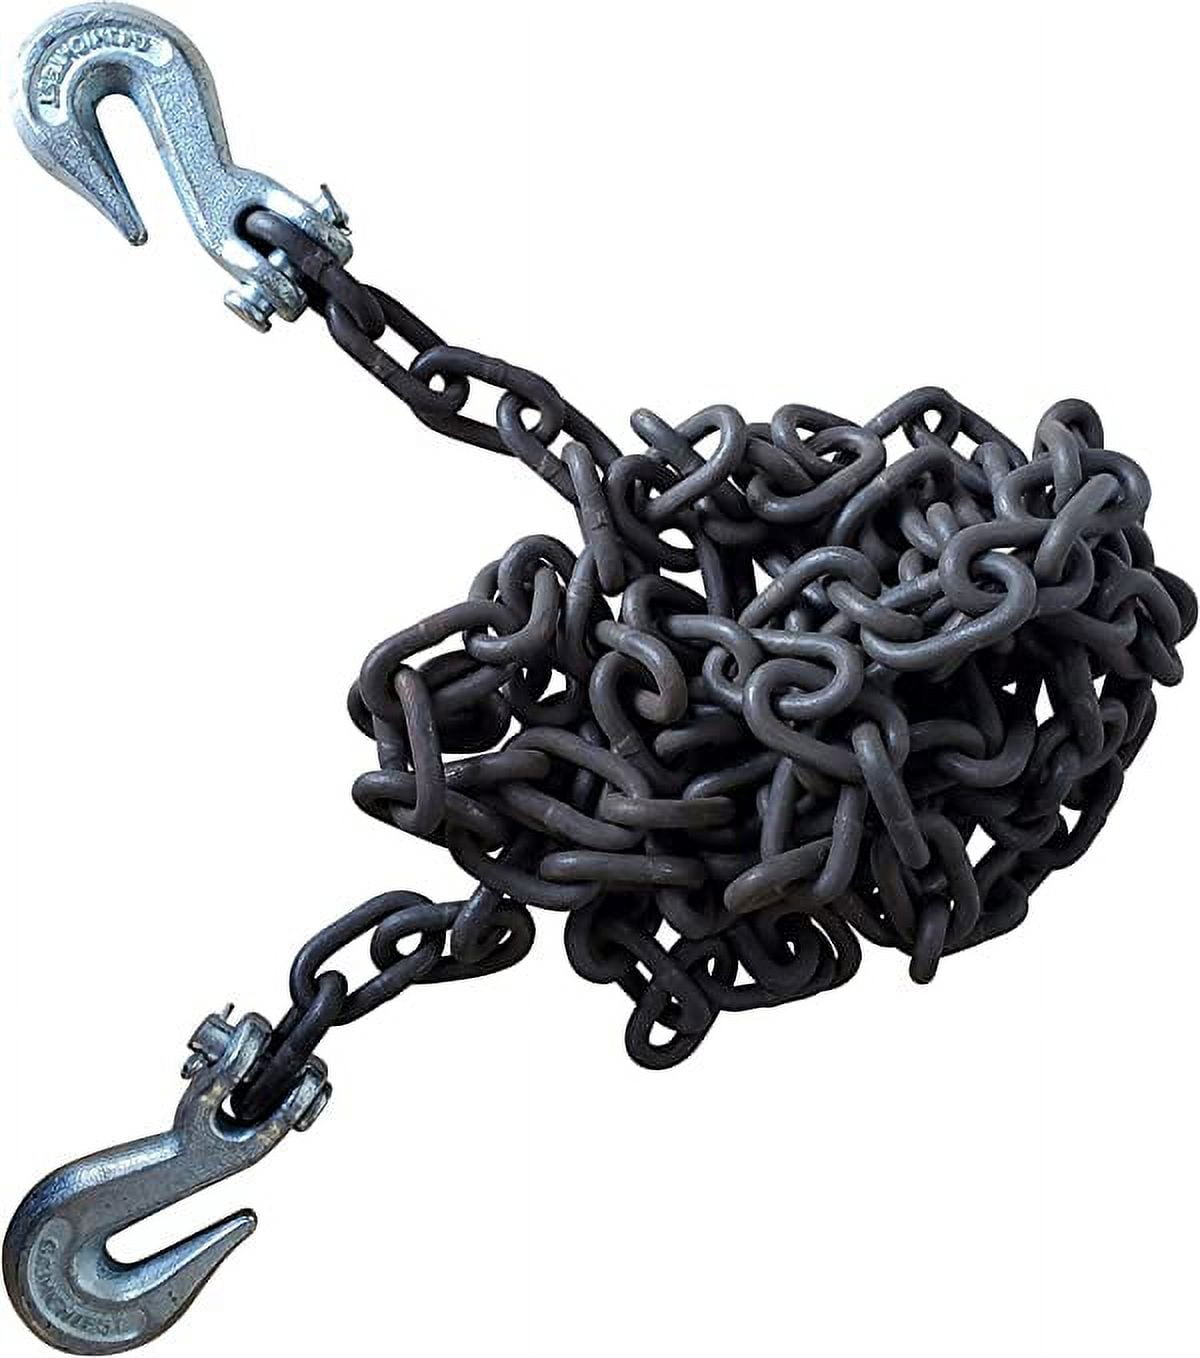 J Hook Tow Chain, 5/16''x2' Tow Chain V Bridle with Large Shank J Hooks and  Grab Hooks for Flatbed Truck Rollback Wrecker Carrier 